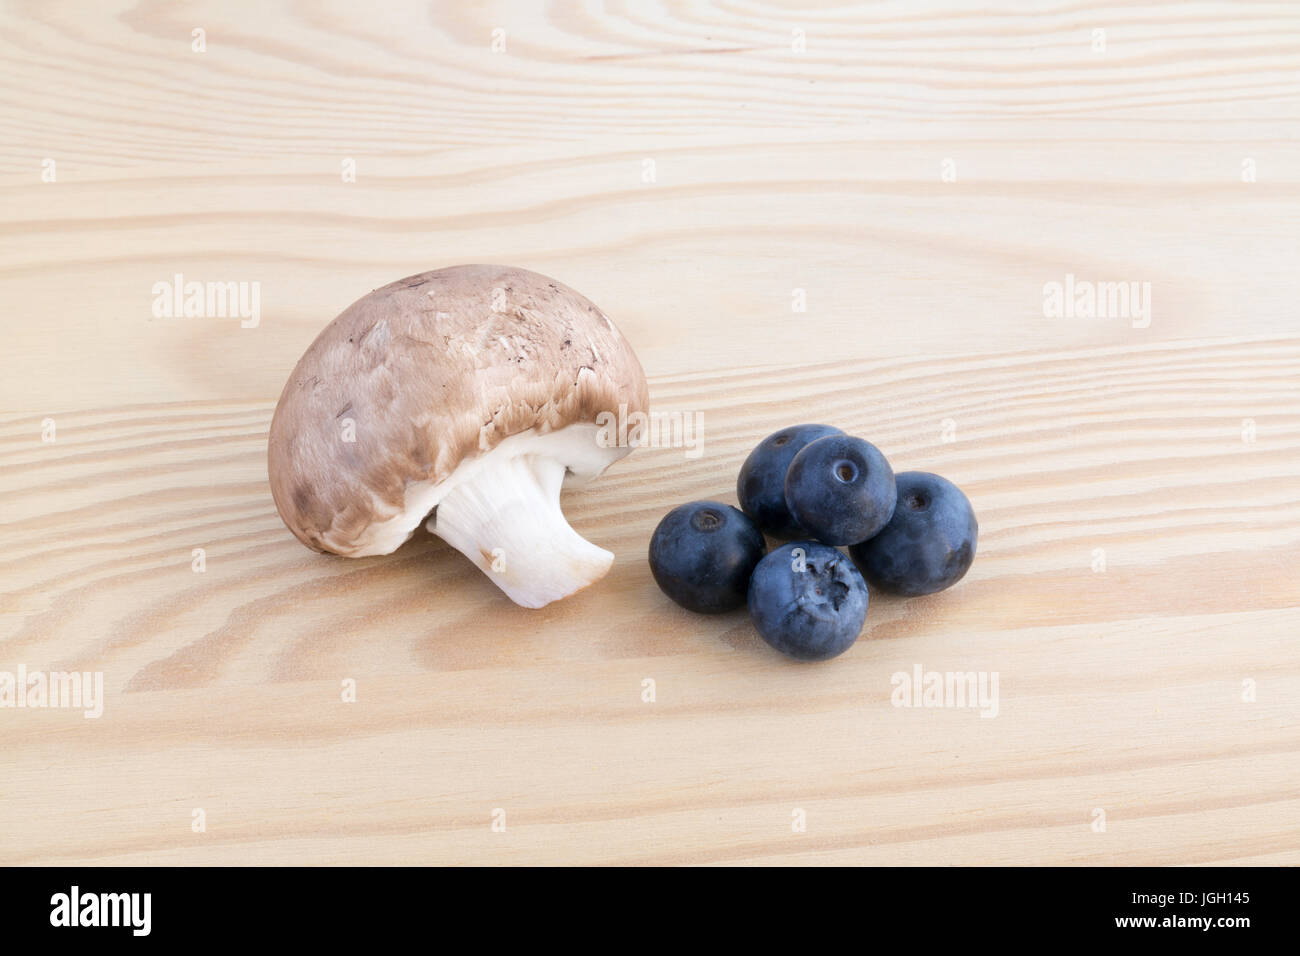 Chestnut mushroom and four blueberries on wooden cutting board Stock Photo